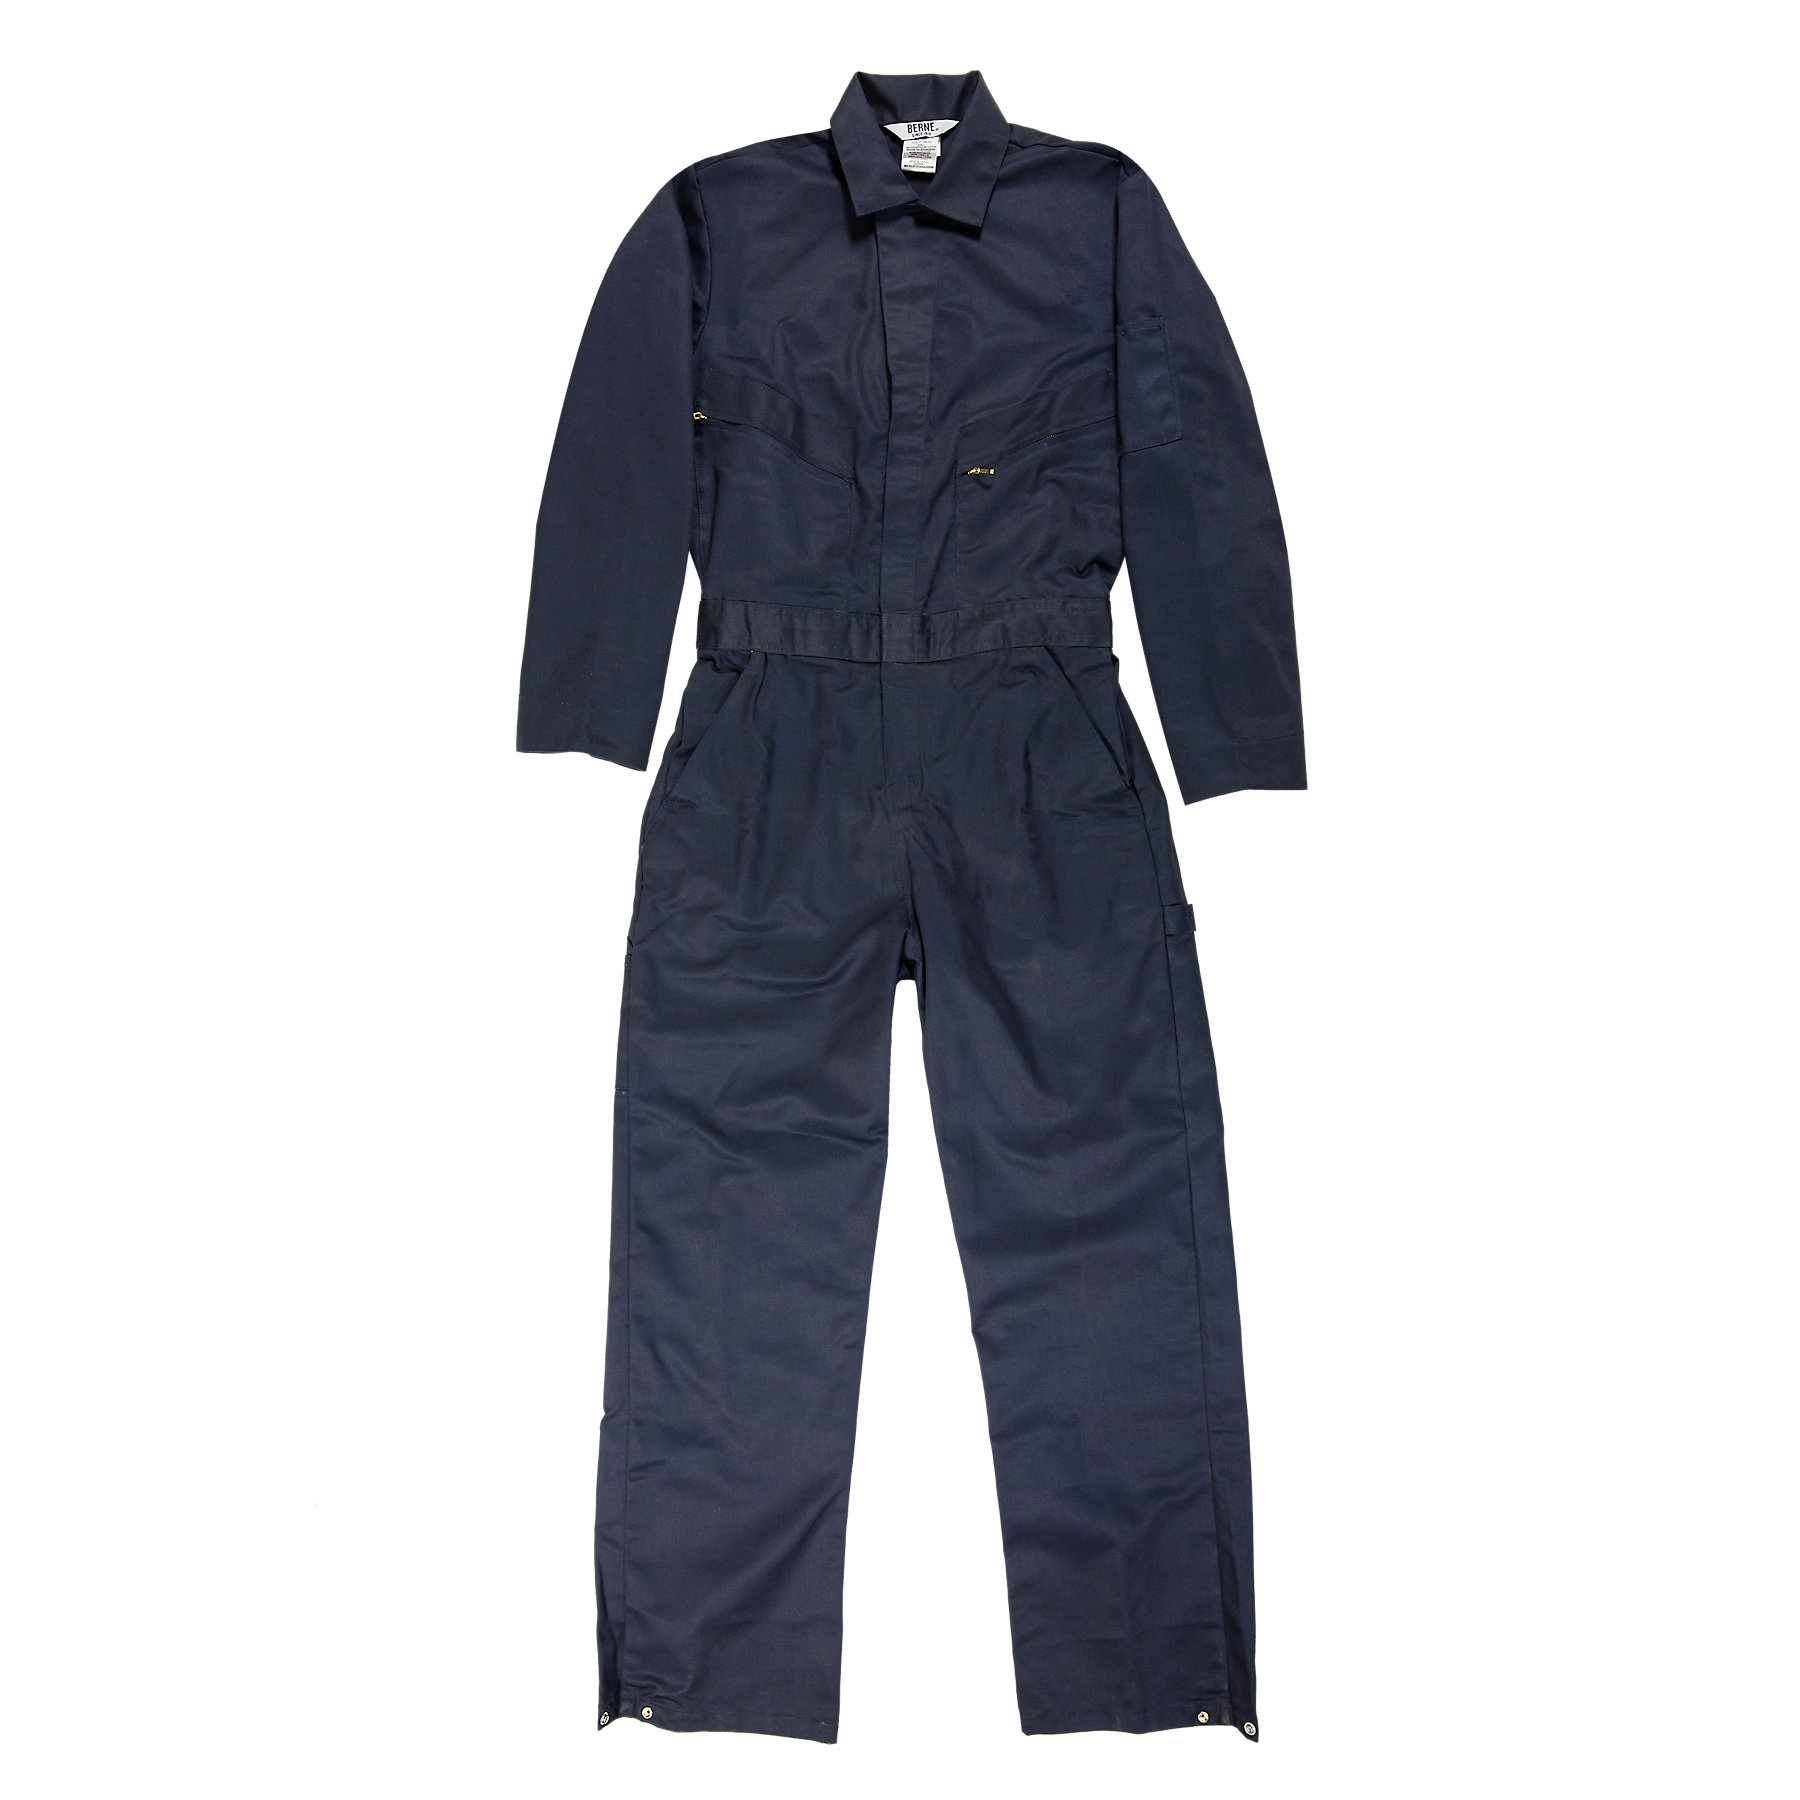 Berne Overalls Size Chart